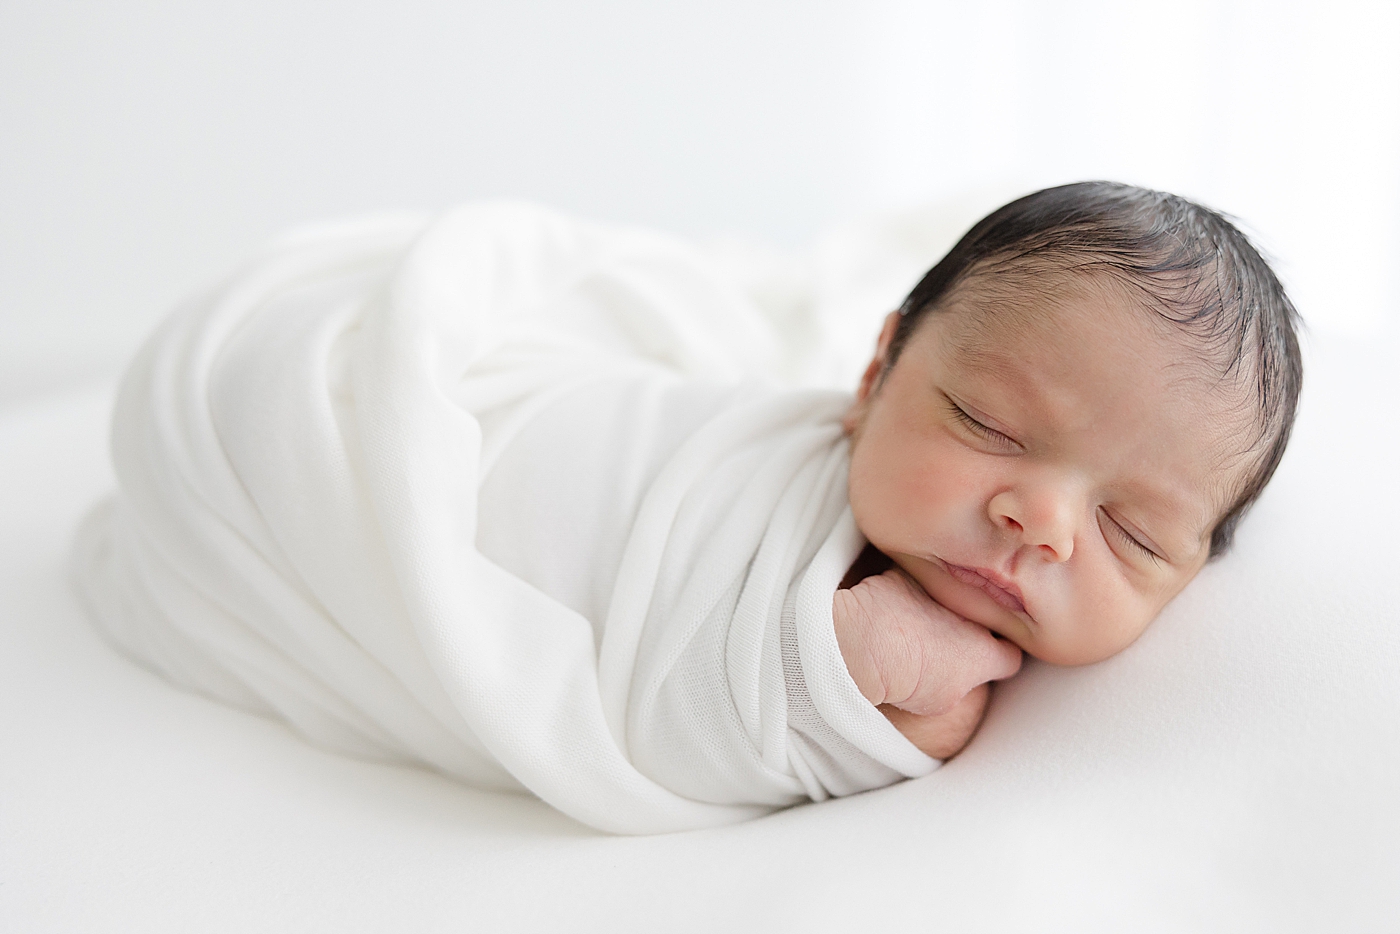 Newborn baby wrapped in a white swaddle | Image by Sana Ahmed Photography 